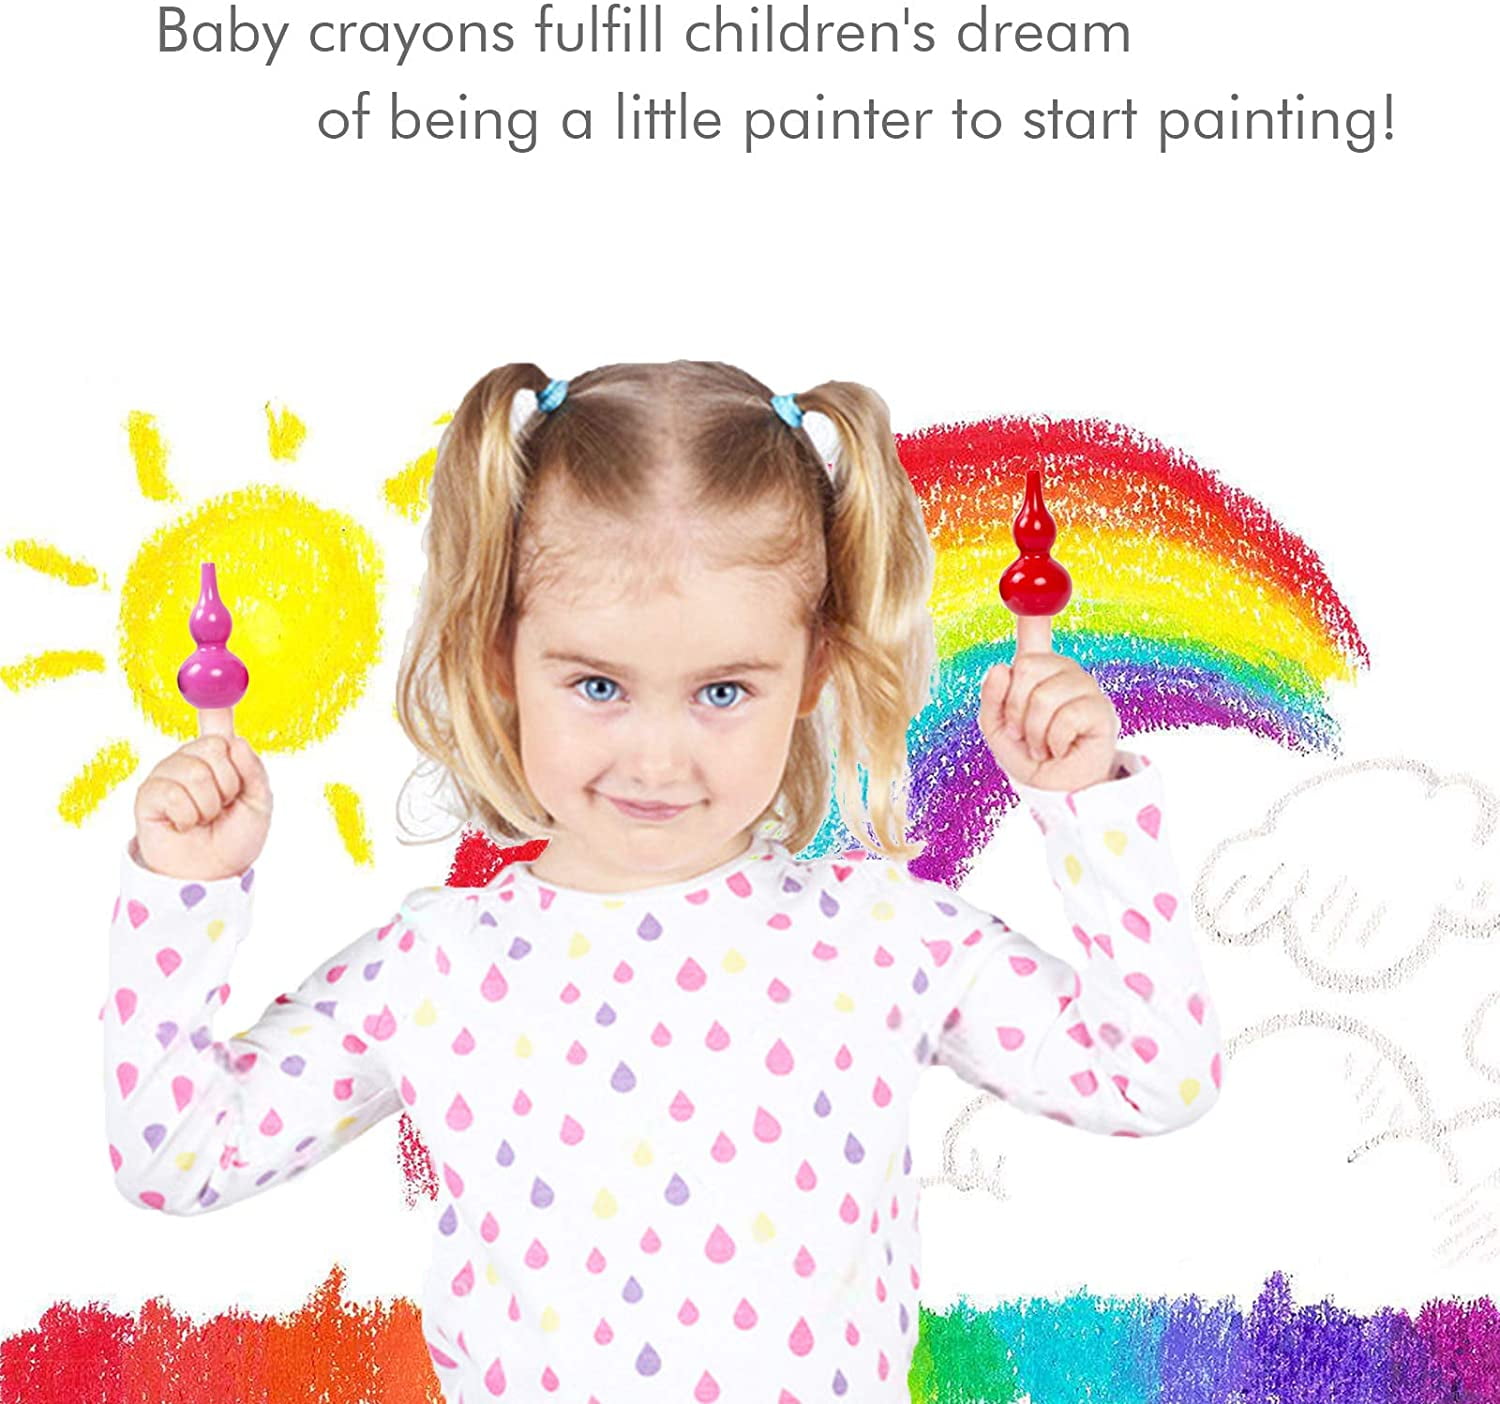 Edible Crayons Is Just What You and Your Child Need